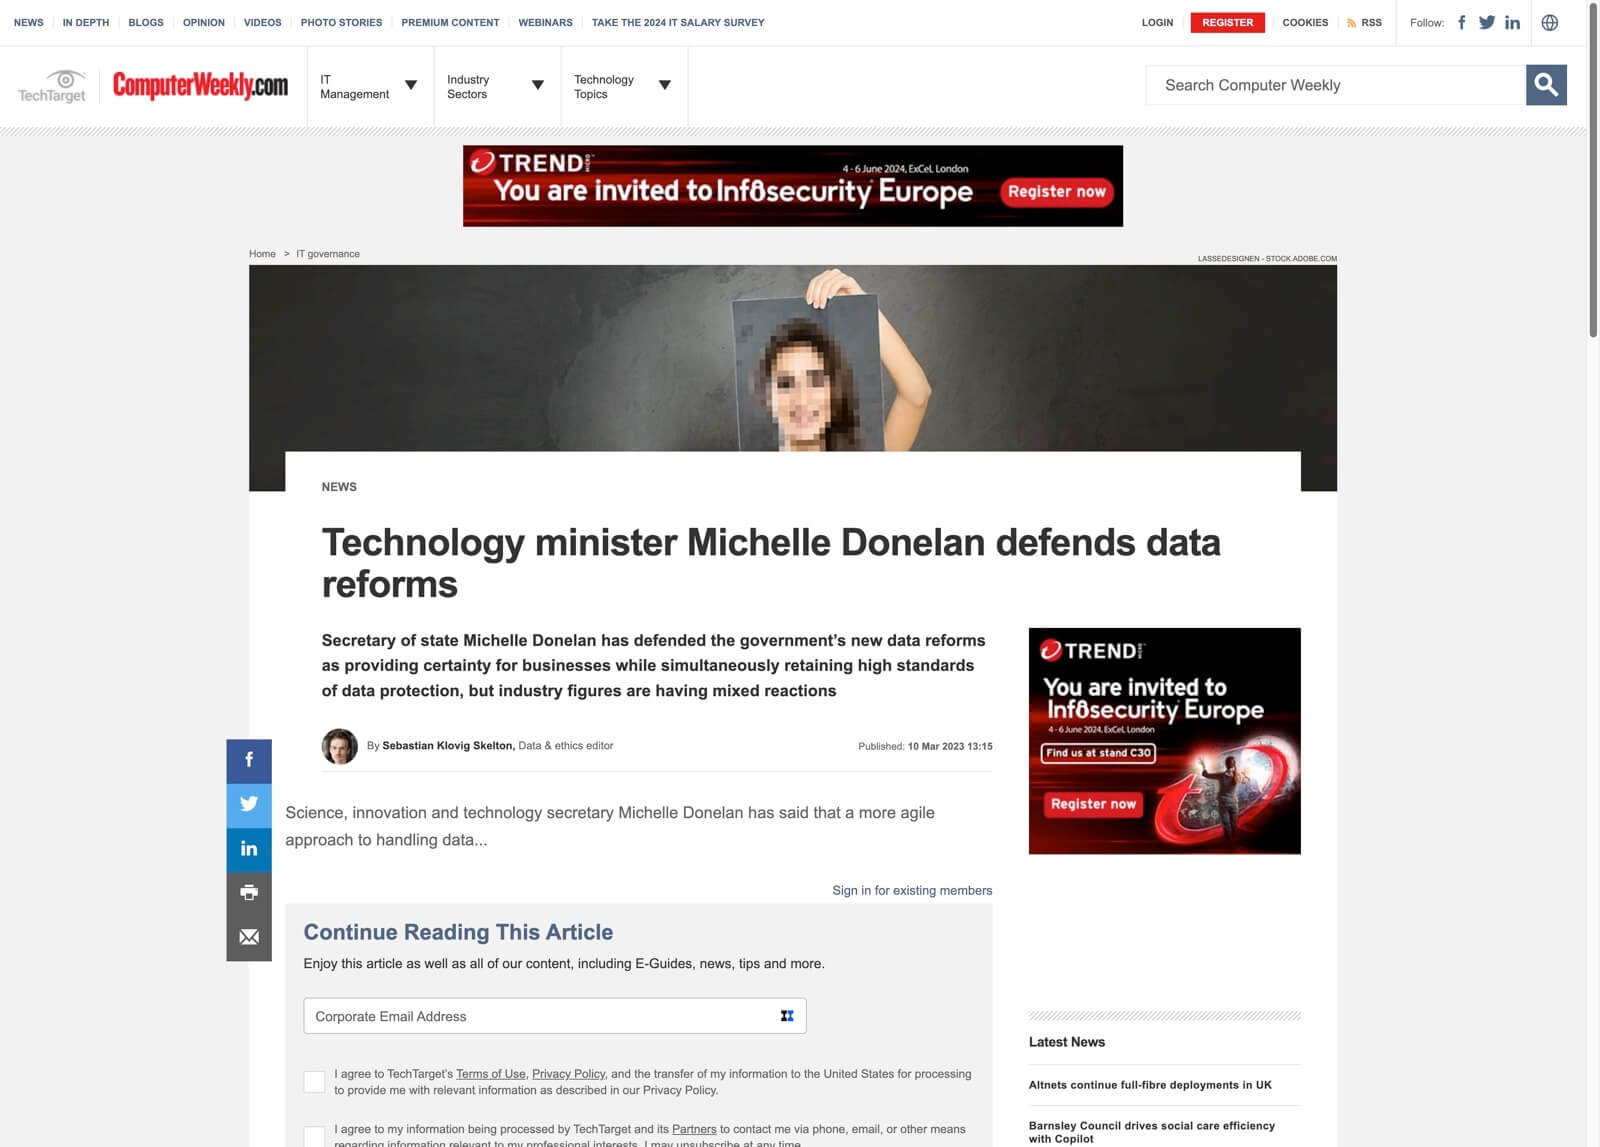 Computer-Weekly-Technology-minister-Michelle-Donelan-defends-data-reforms-Computer-Weekly.jpg